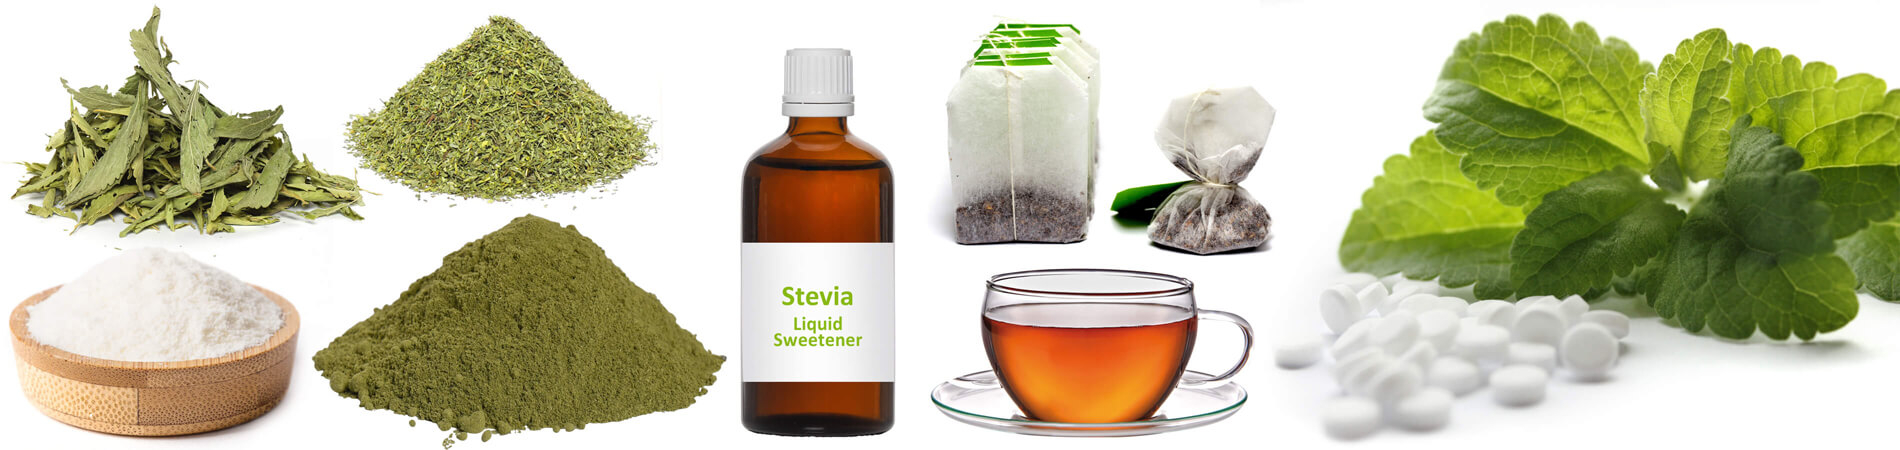 How to dose Stevia correctly | Stevia Guide for the...